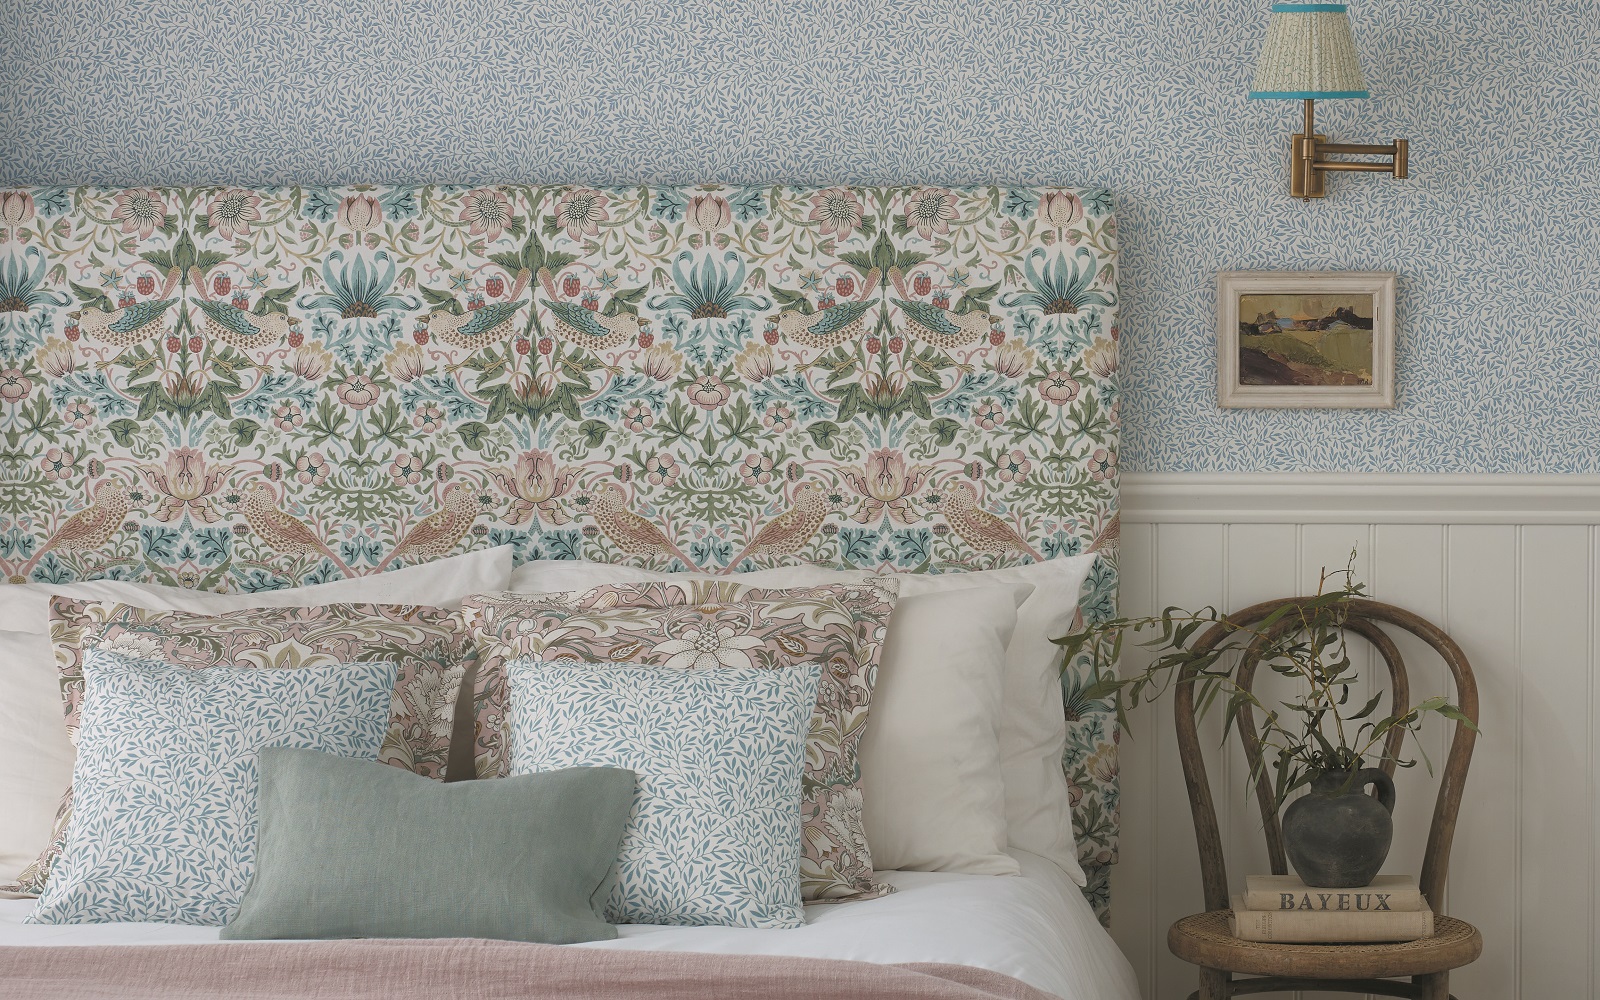 William-Morris Pink And Aqua details next to side chair by bed.